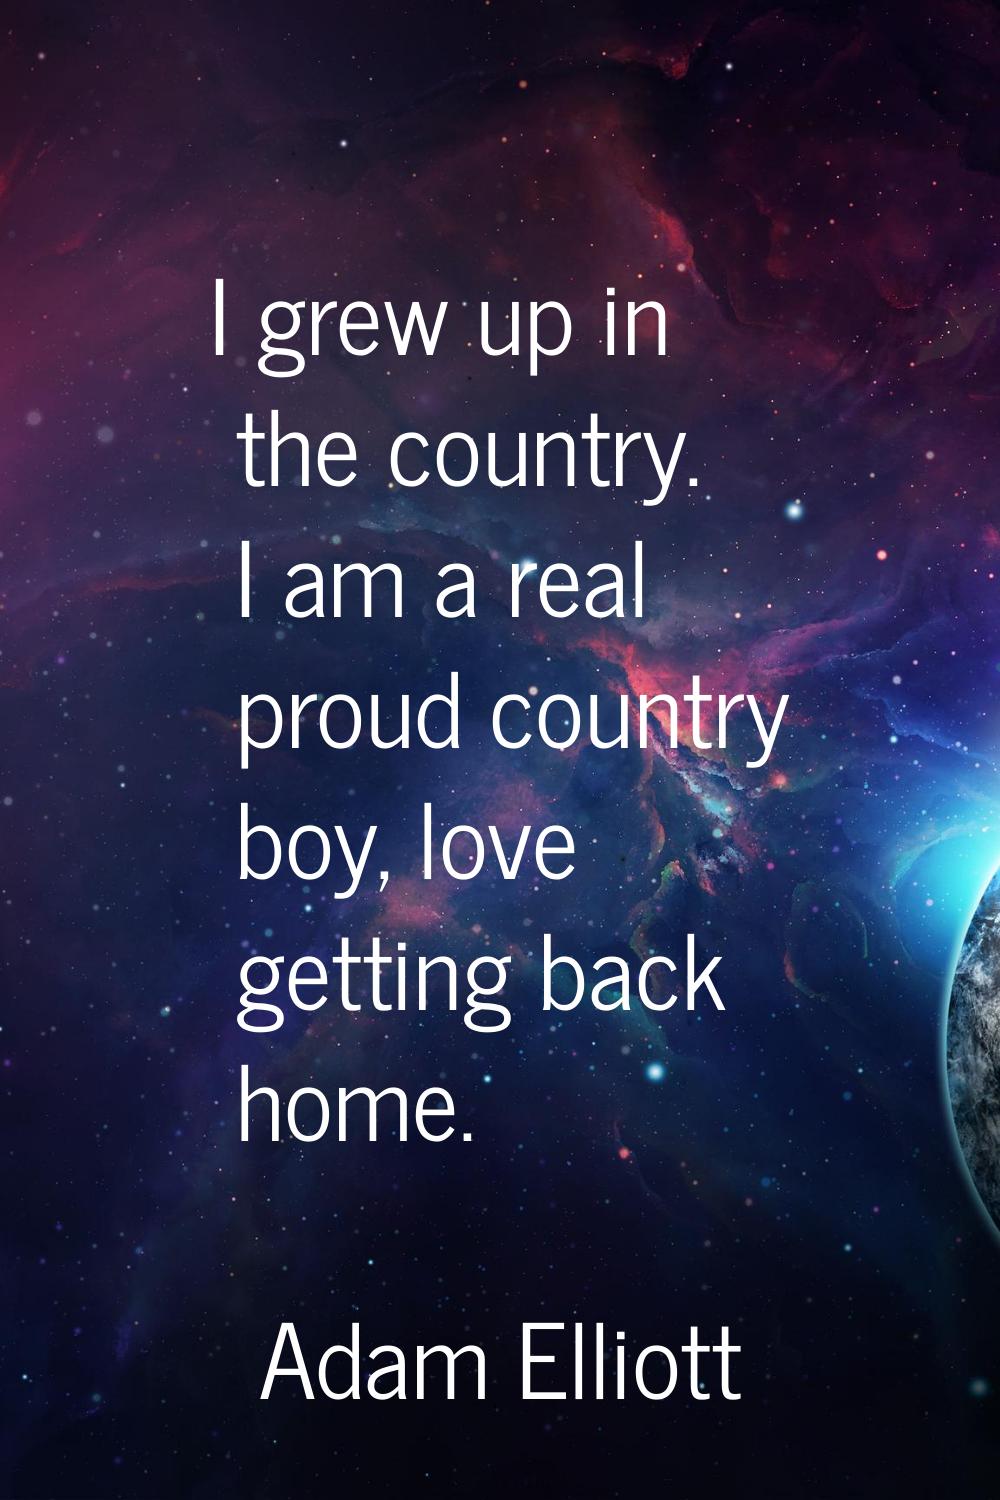 I grew up in the country. I am a real proud country boy, love getting back home.